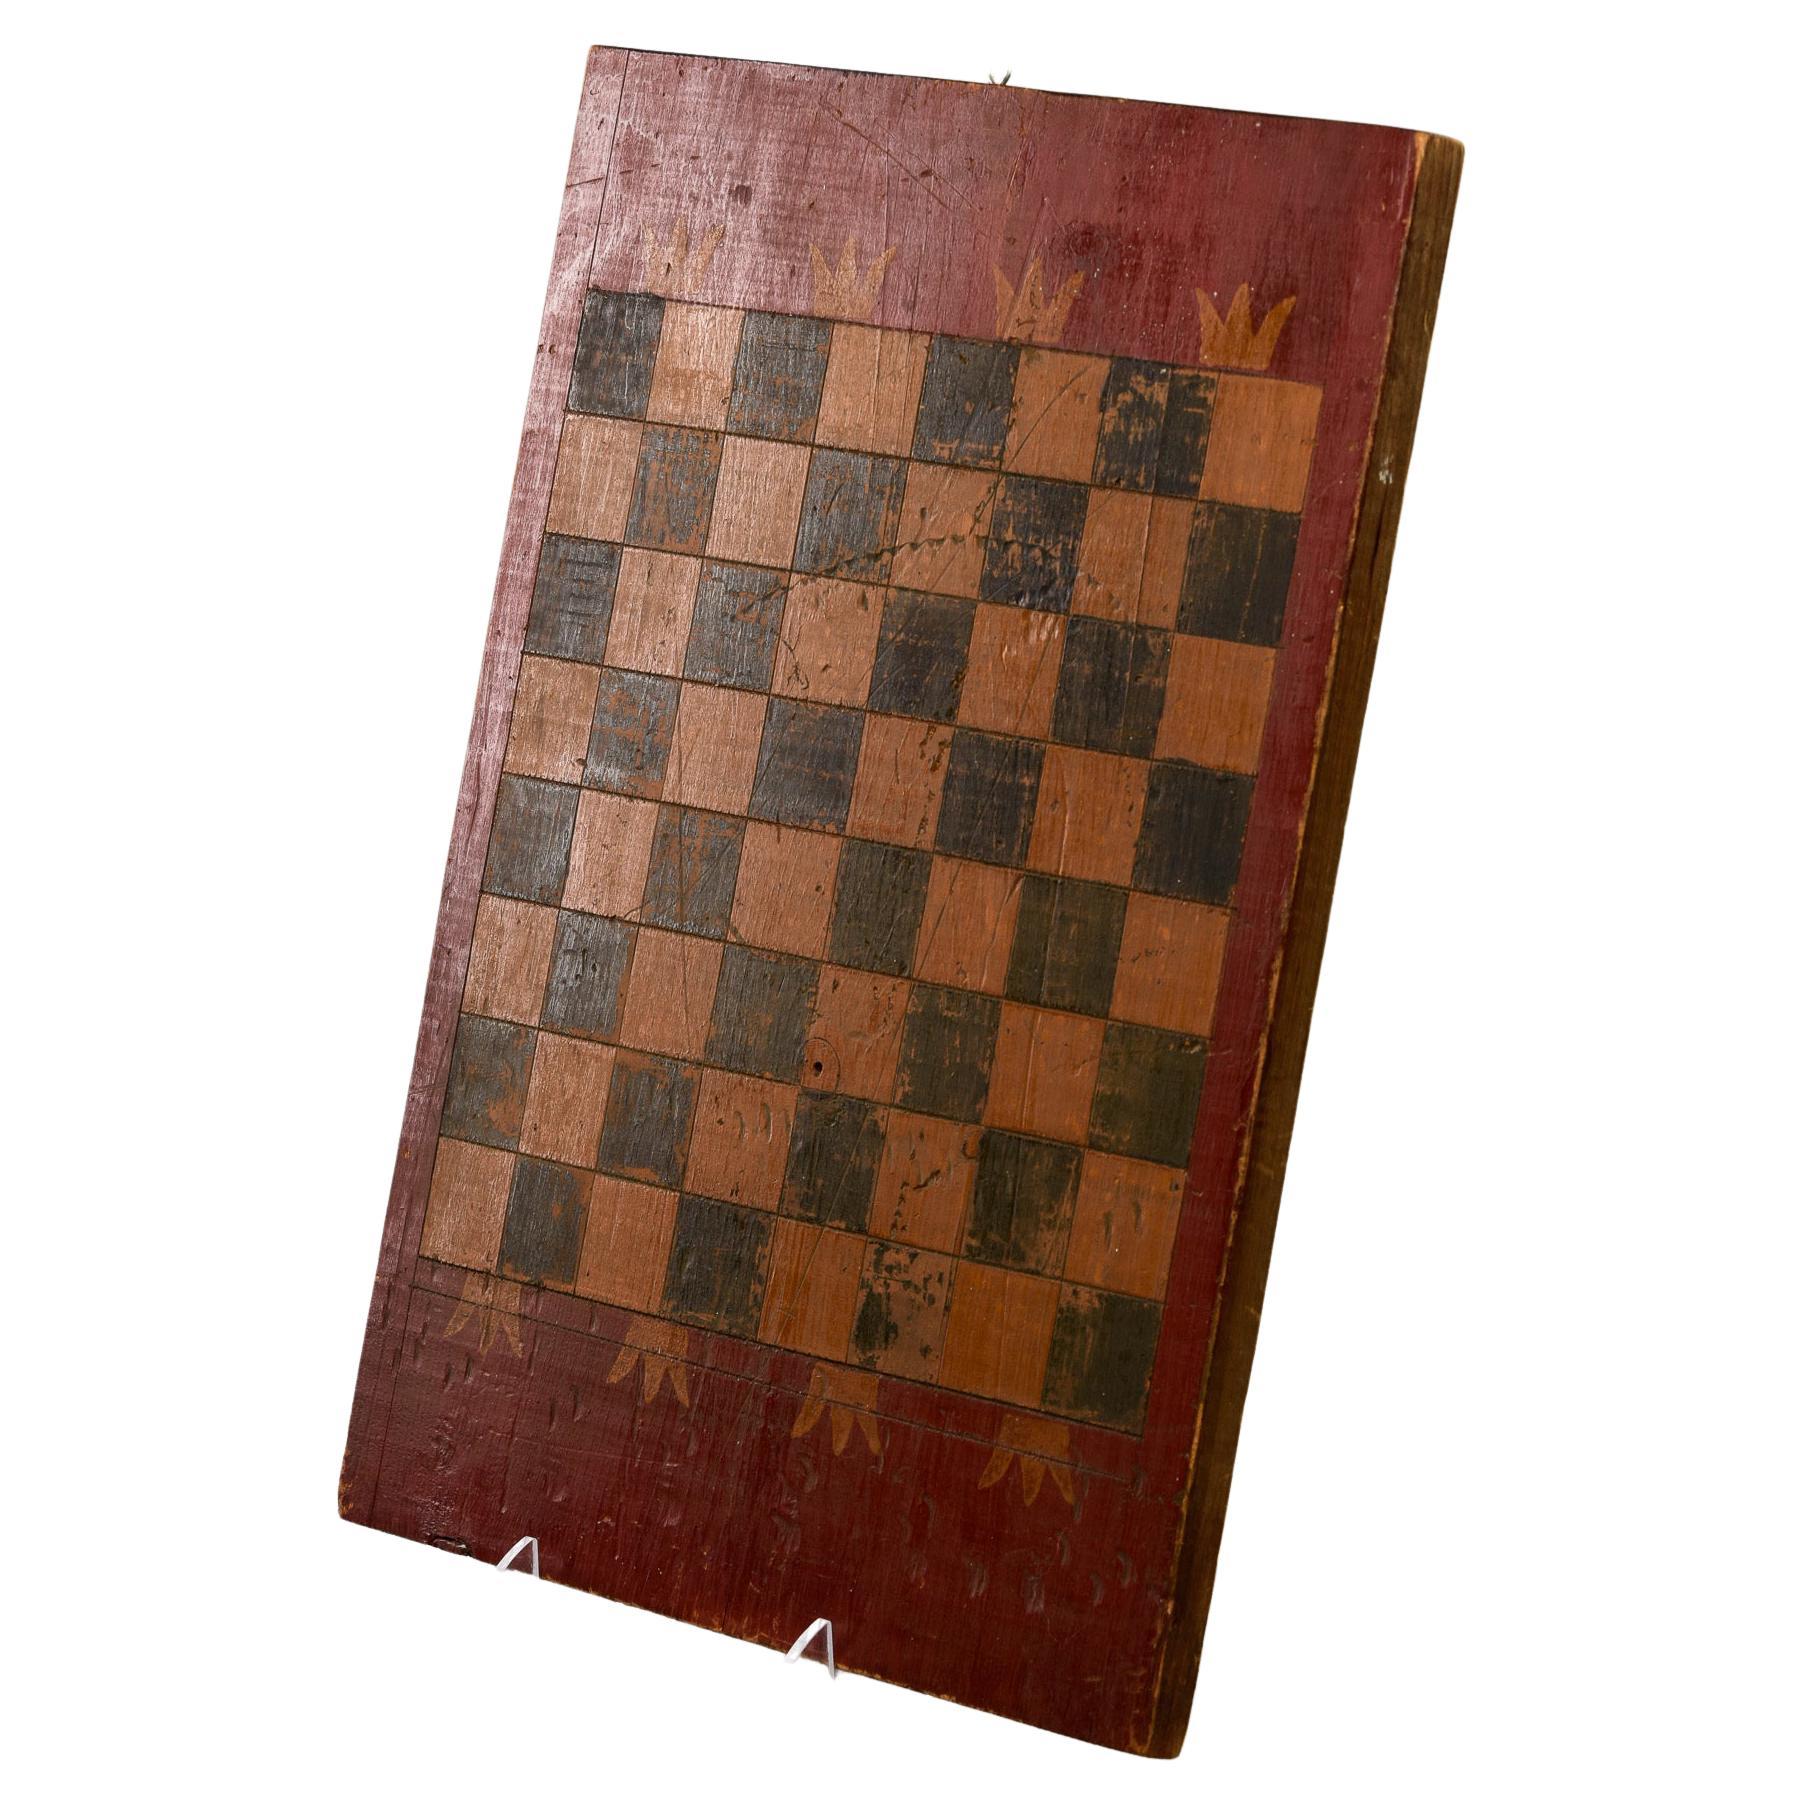 Circa 1900 hand painted game board found in England. Red edges with gold crown motif and black and gold squares. Makes a great wall piece. Unknown maker.